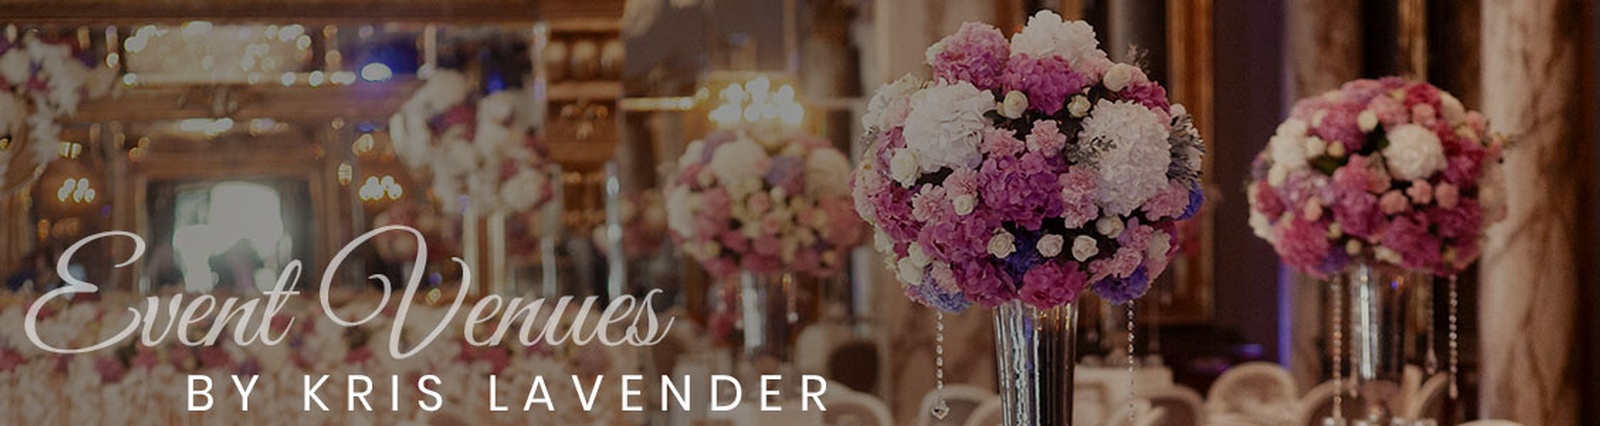 Event Venues by Kris Lavender - Wedding and Event Planners in Atlanta Georgia